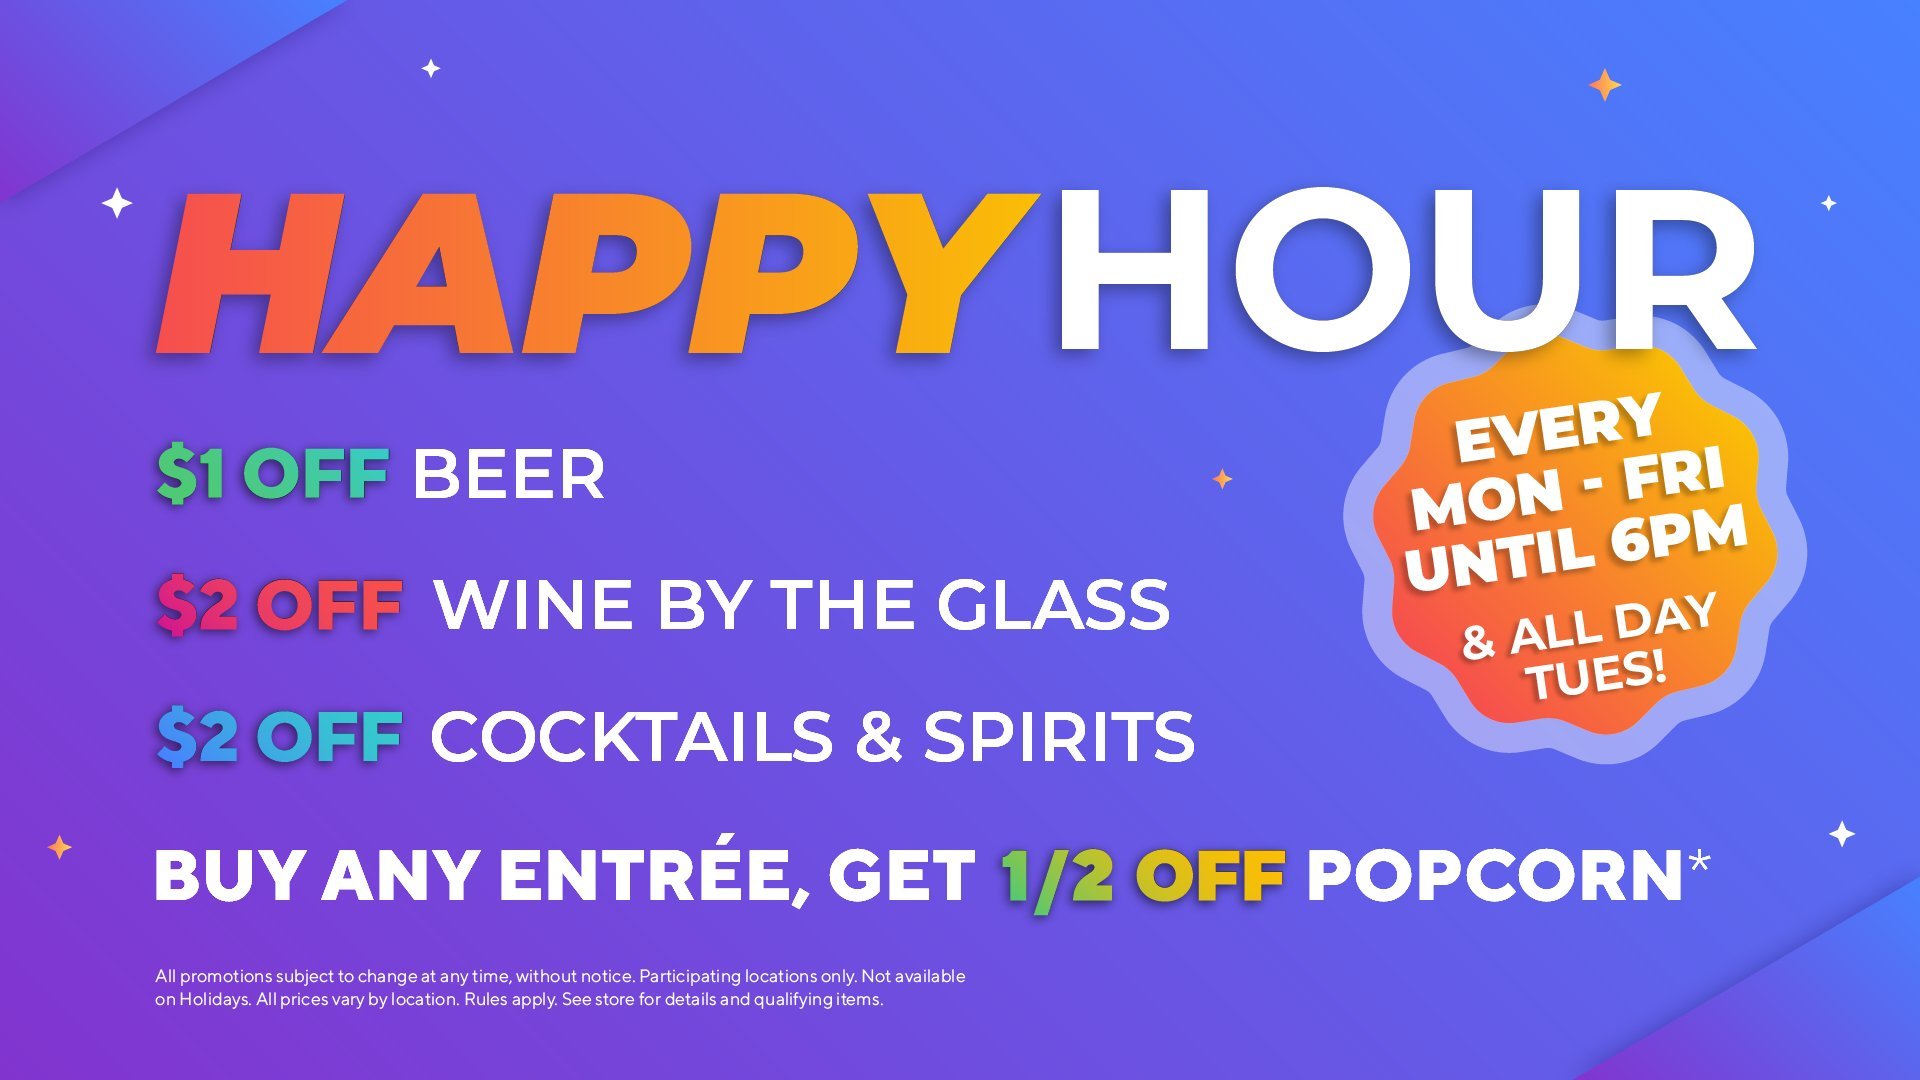 Happy Hour Every Mon-Friday until 6PM